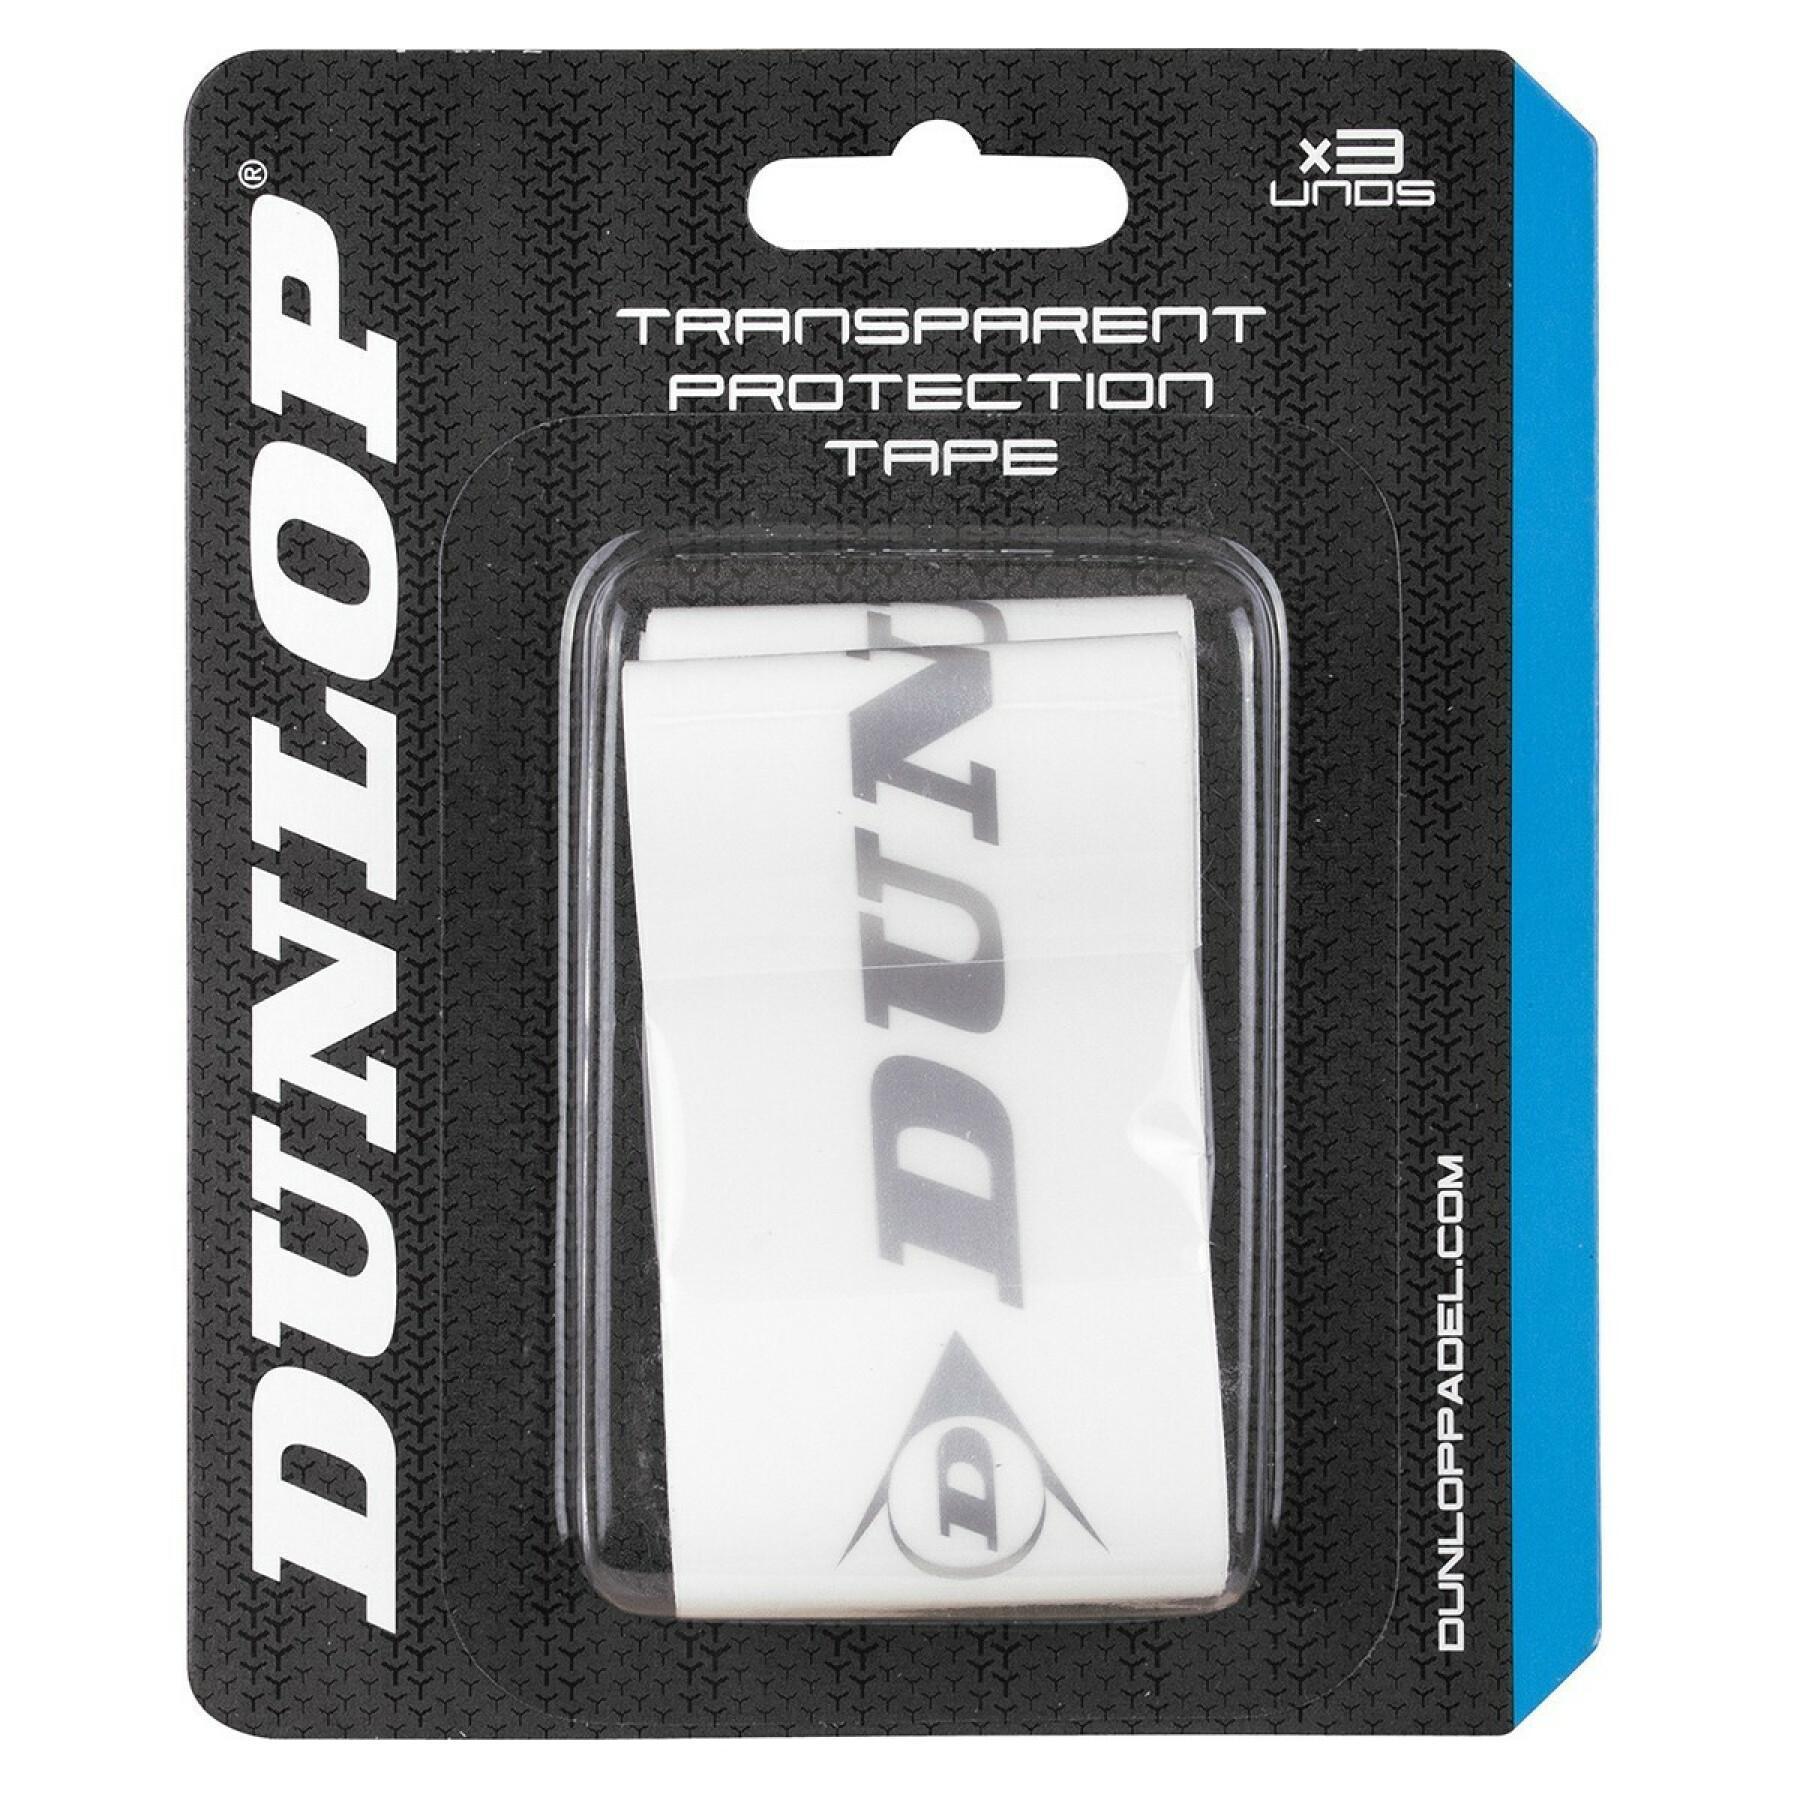 Dunlop protection tape 3